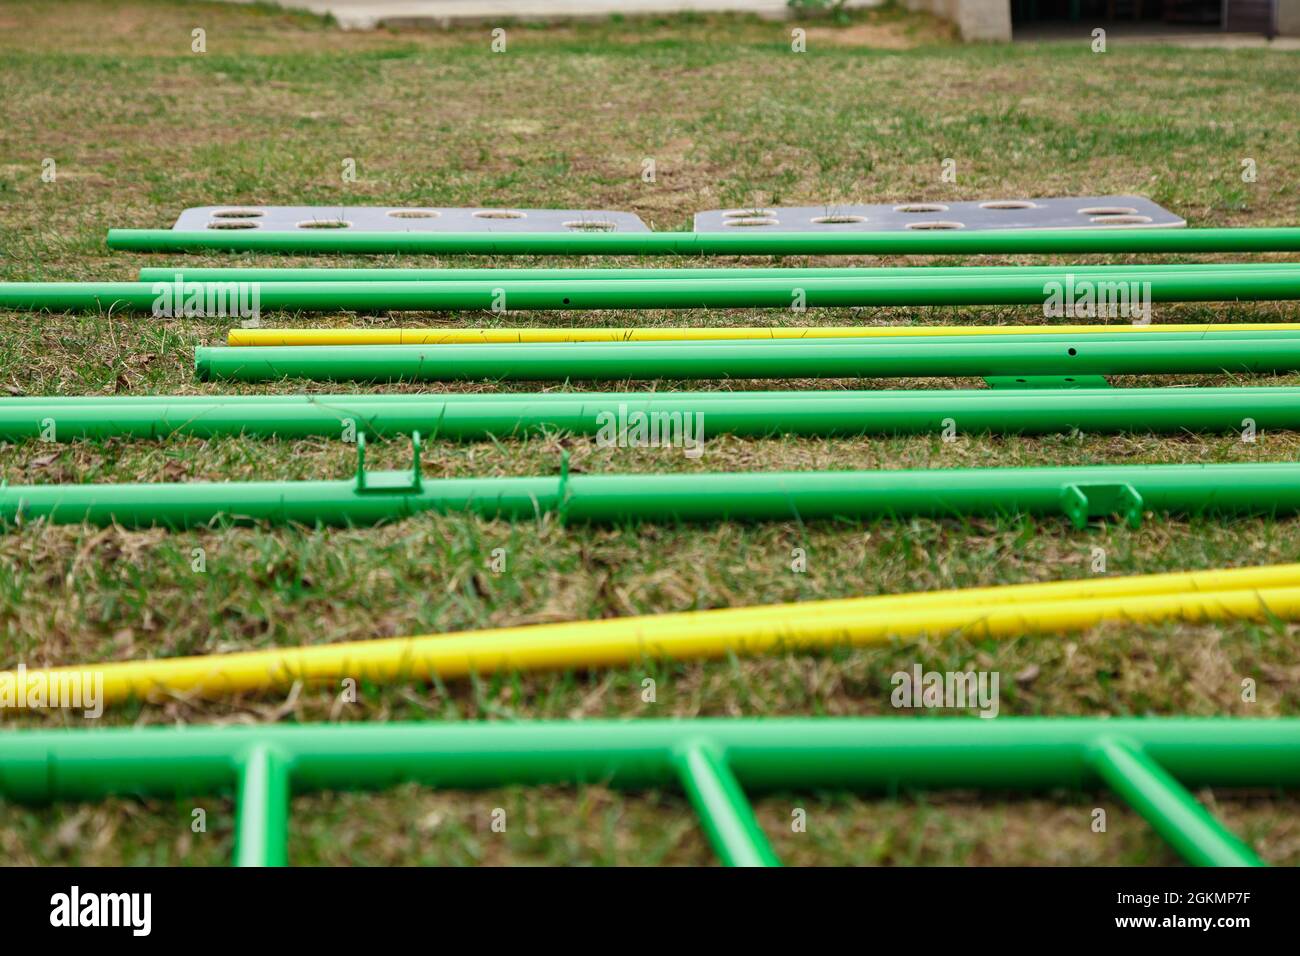 The metal details of playground on the ground Stock Photo